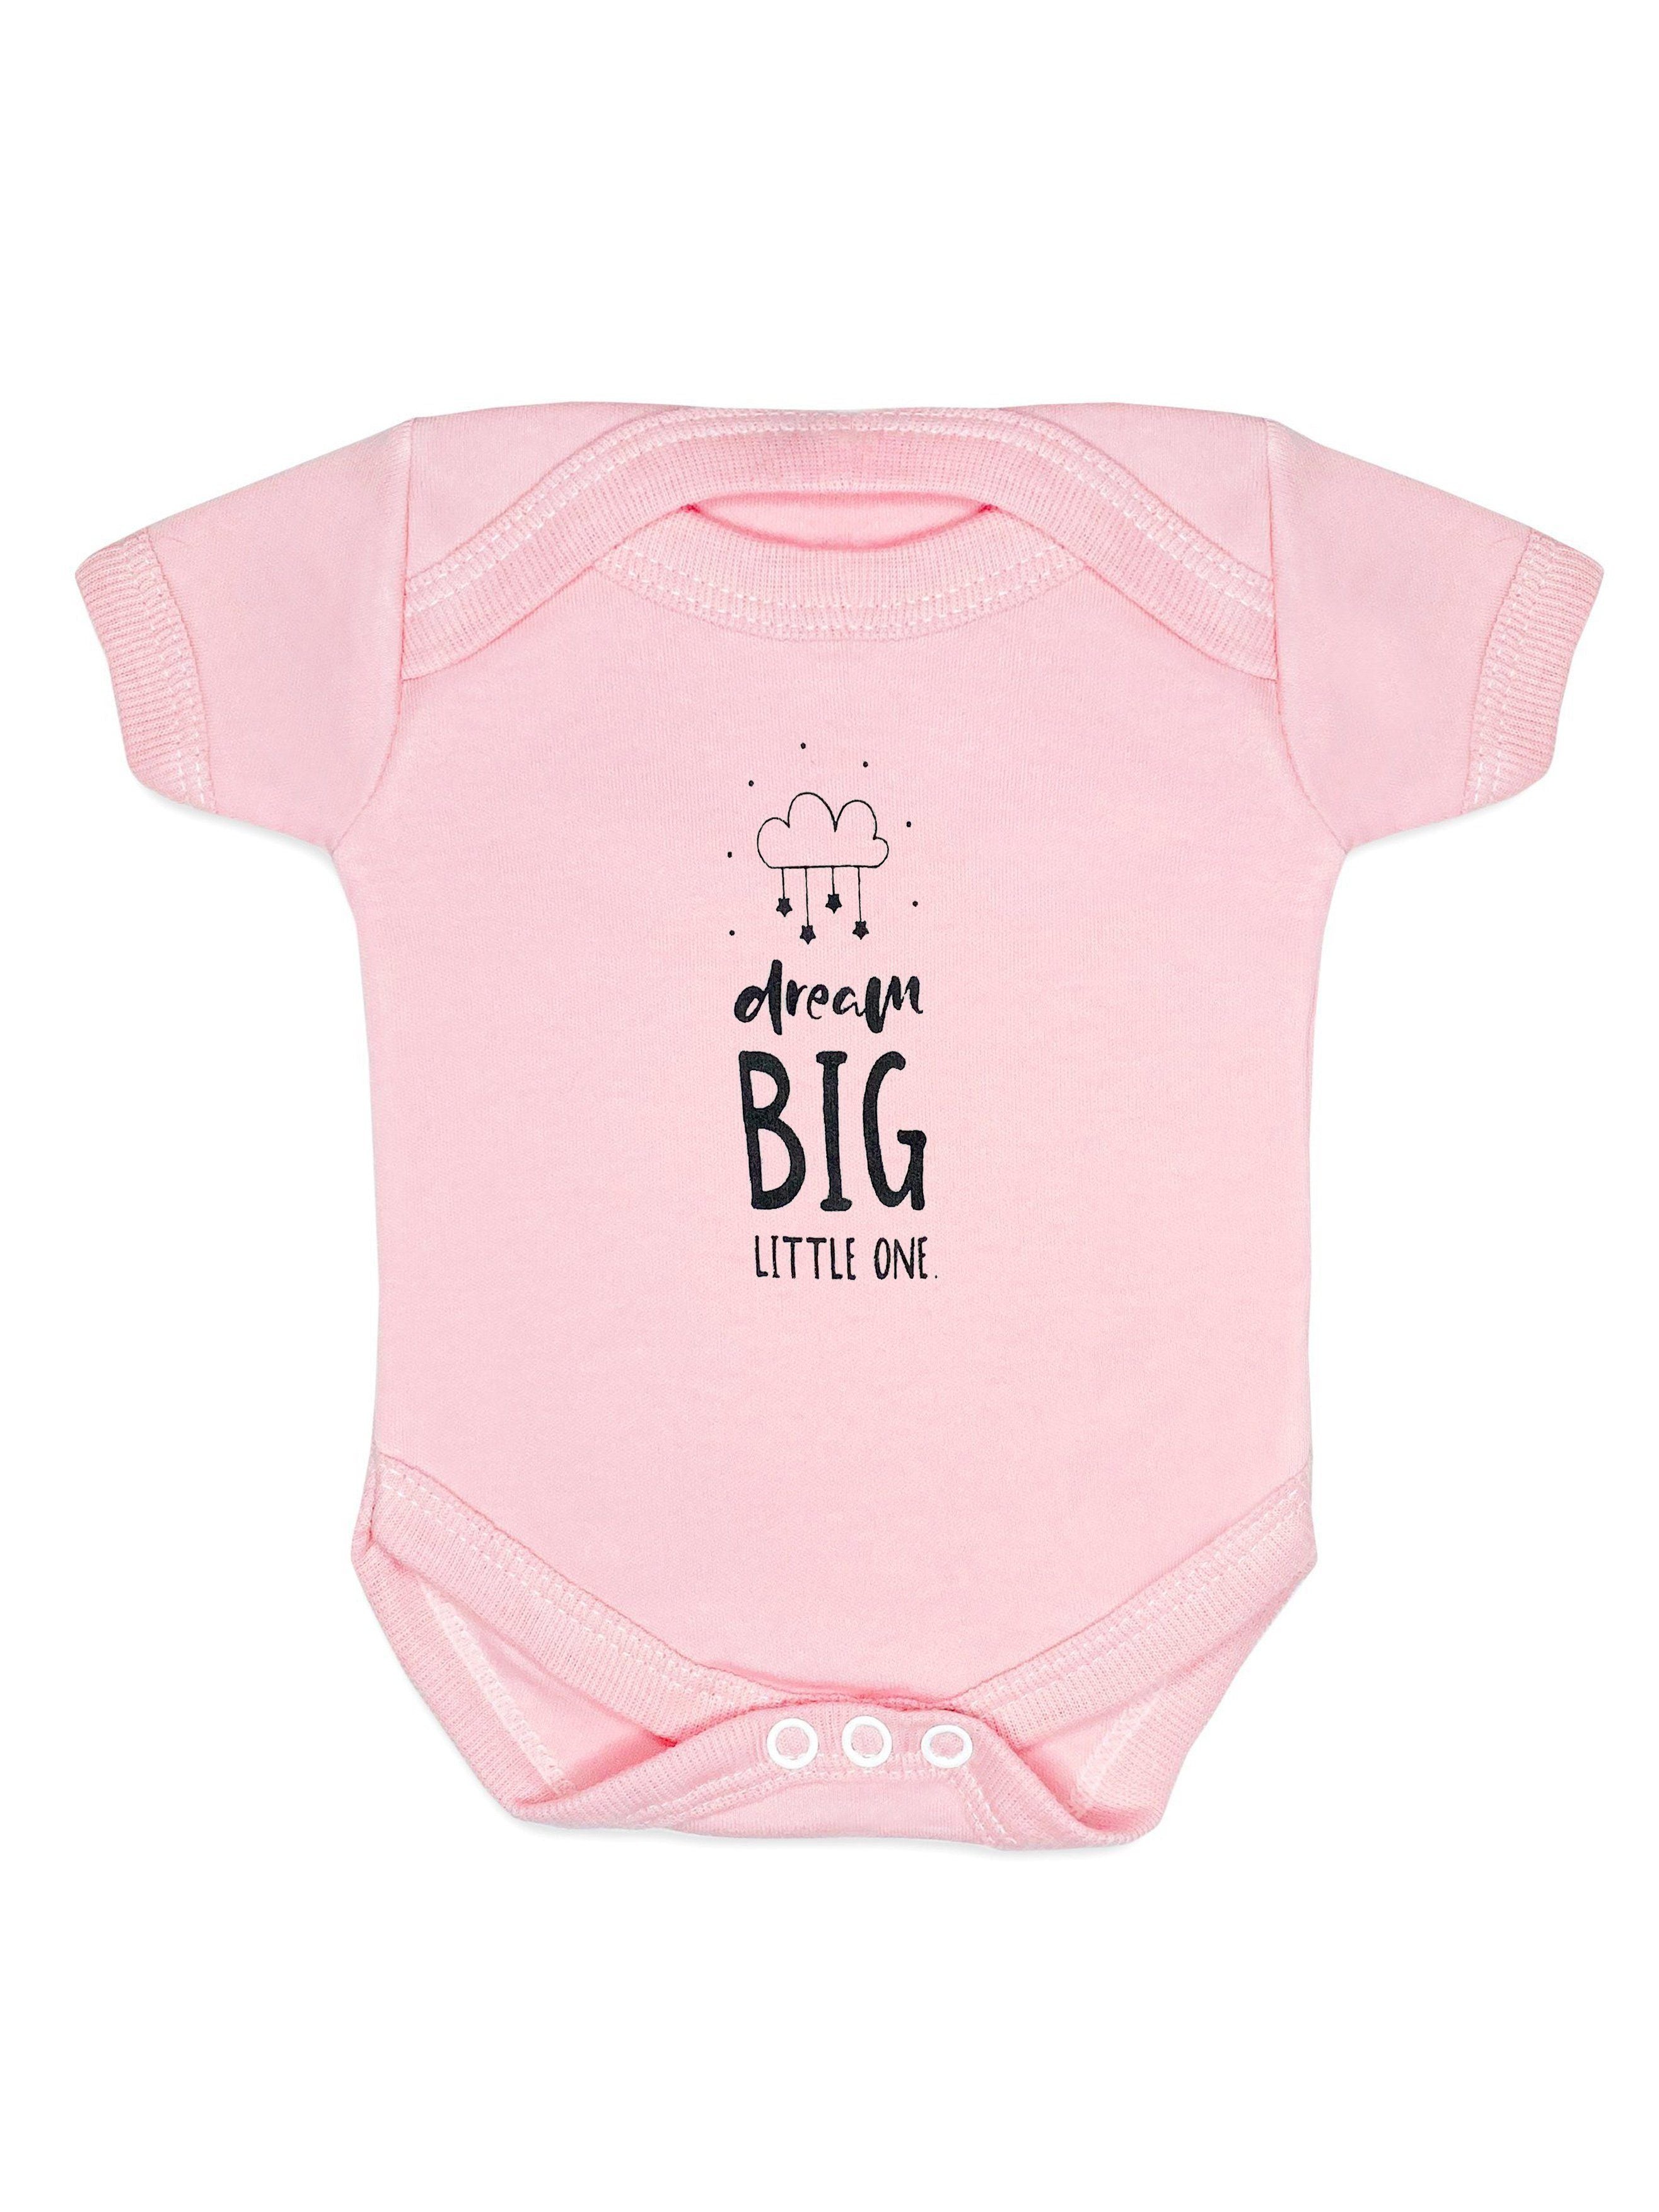 "Dream Big Little One" Bodysuit - Pink - Bodysuit / Vest - Little Mouse Baby Clothing & Gifts